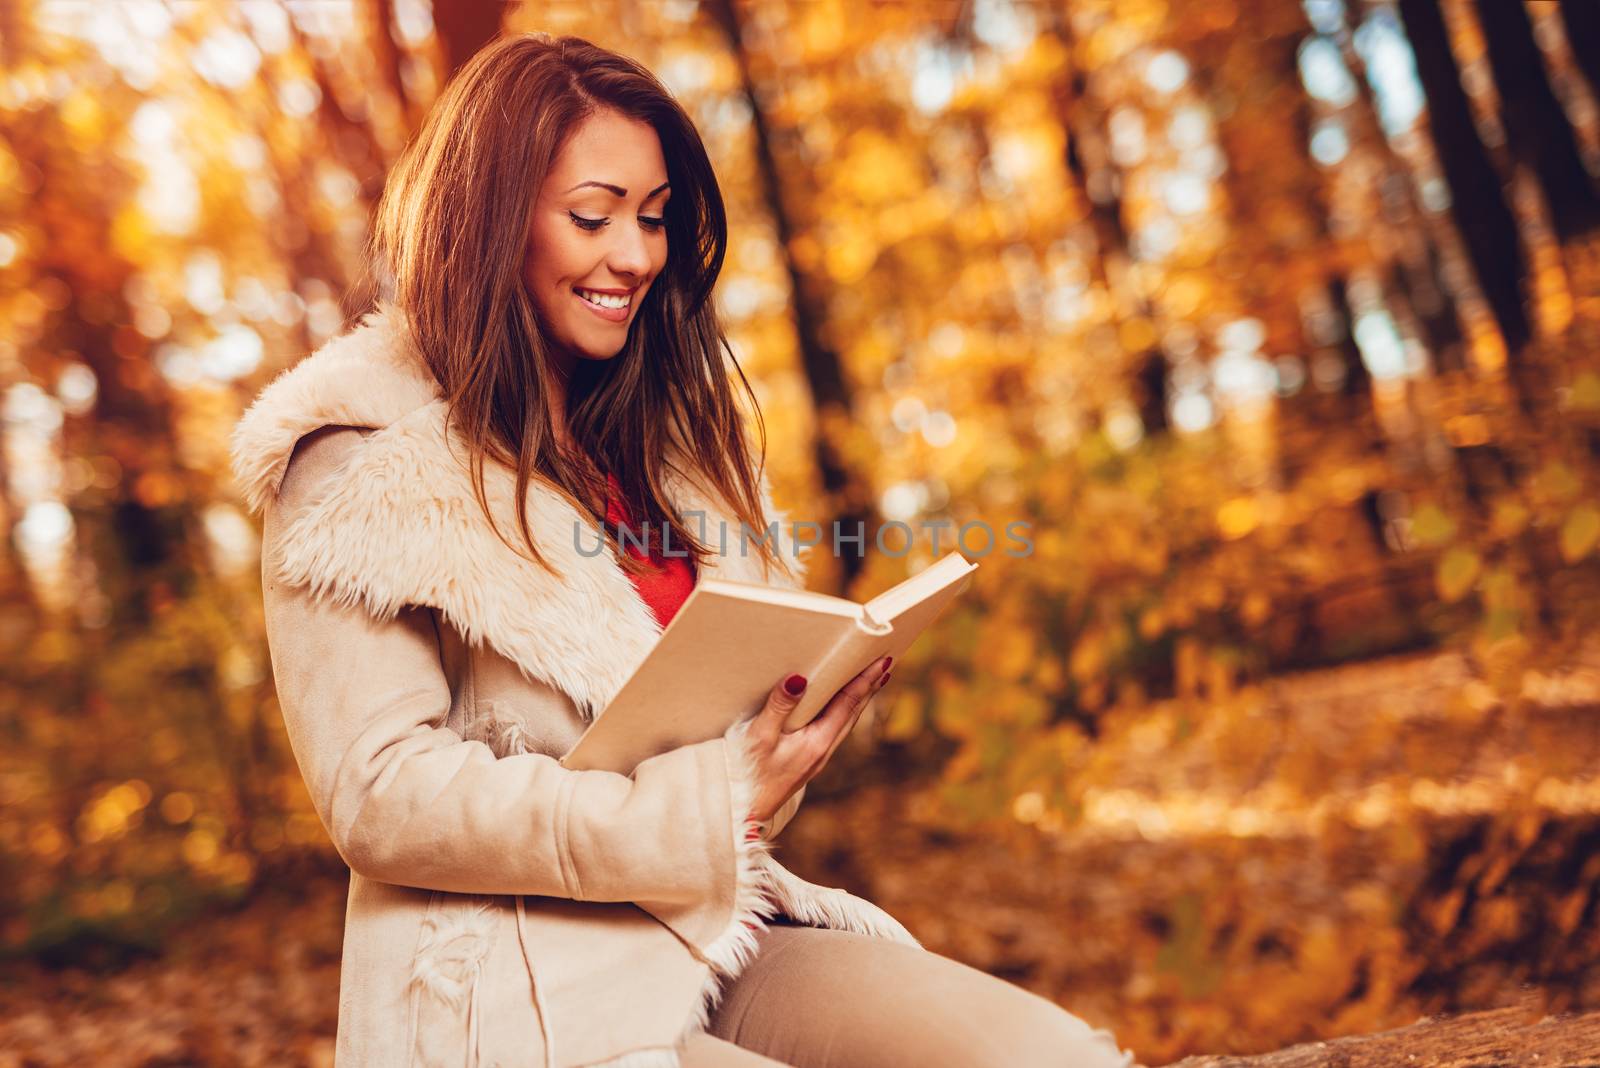 Beautiful young smiling woman reading book in sunny forest in autumn colors.